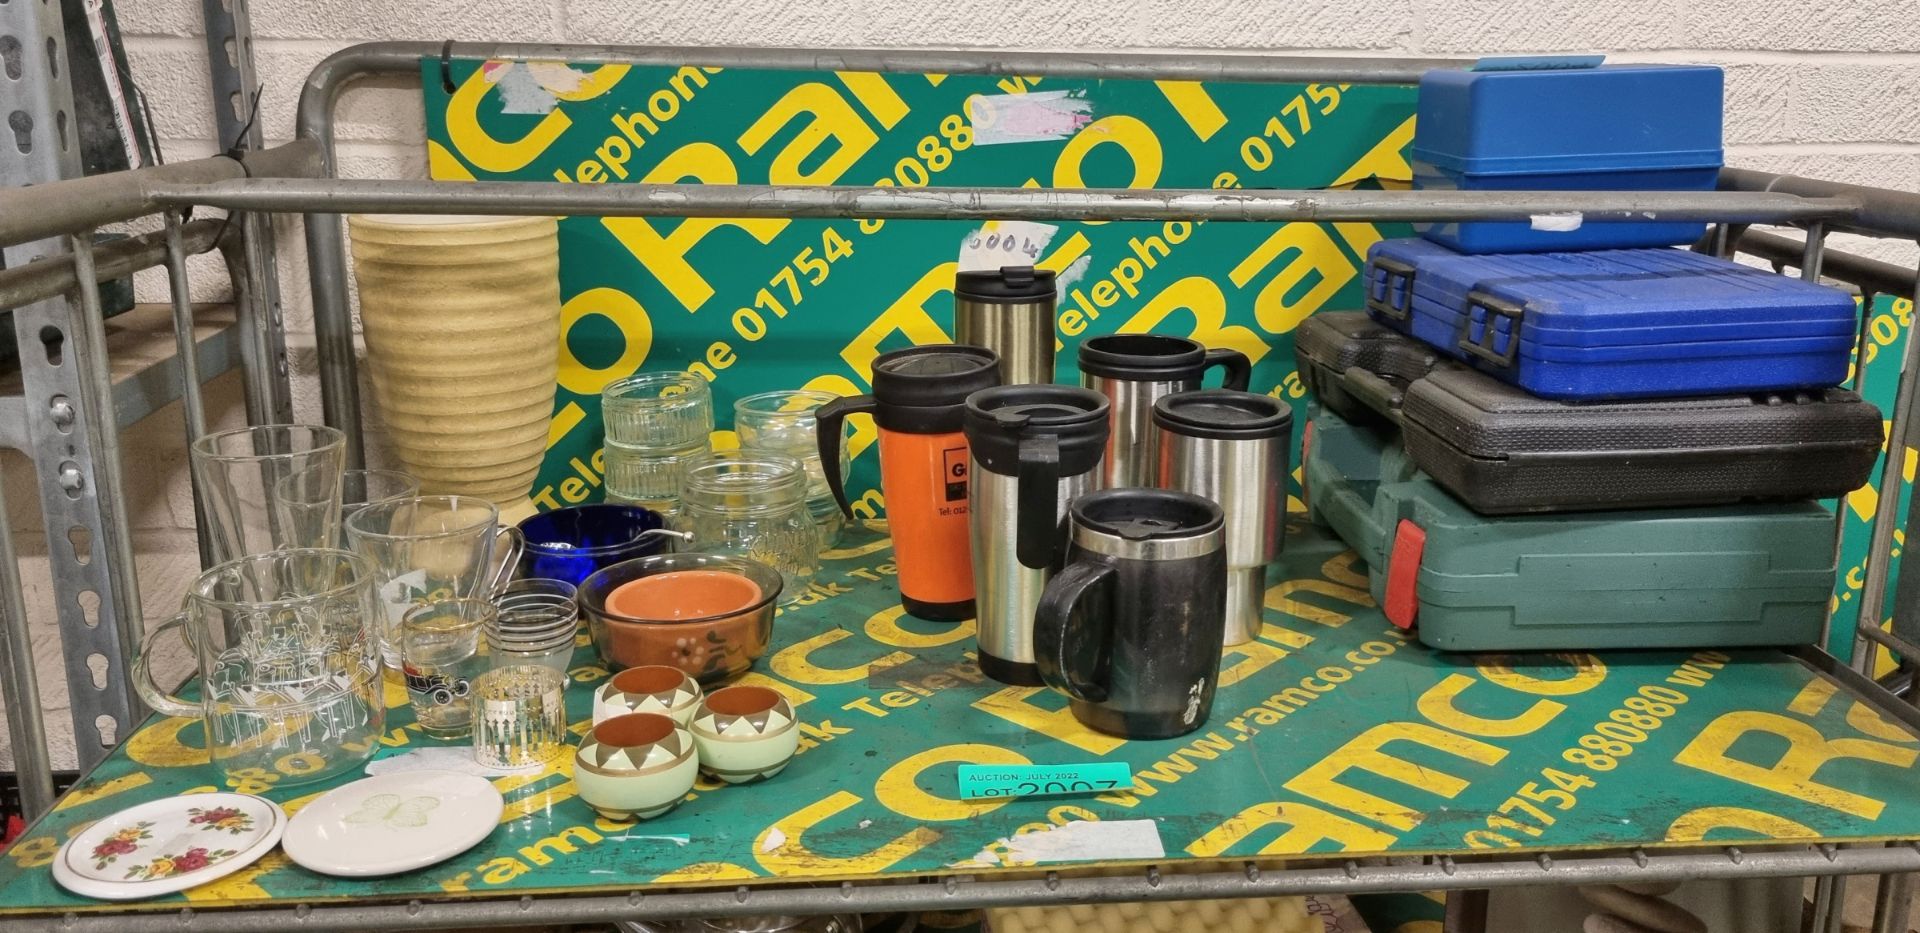 Glasses, ornaments, used drinking cups, empty tool boxes